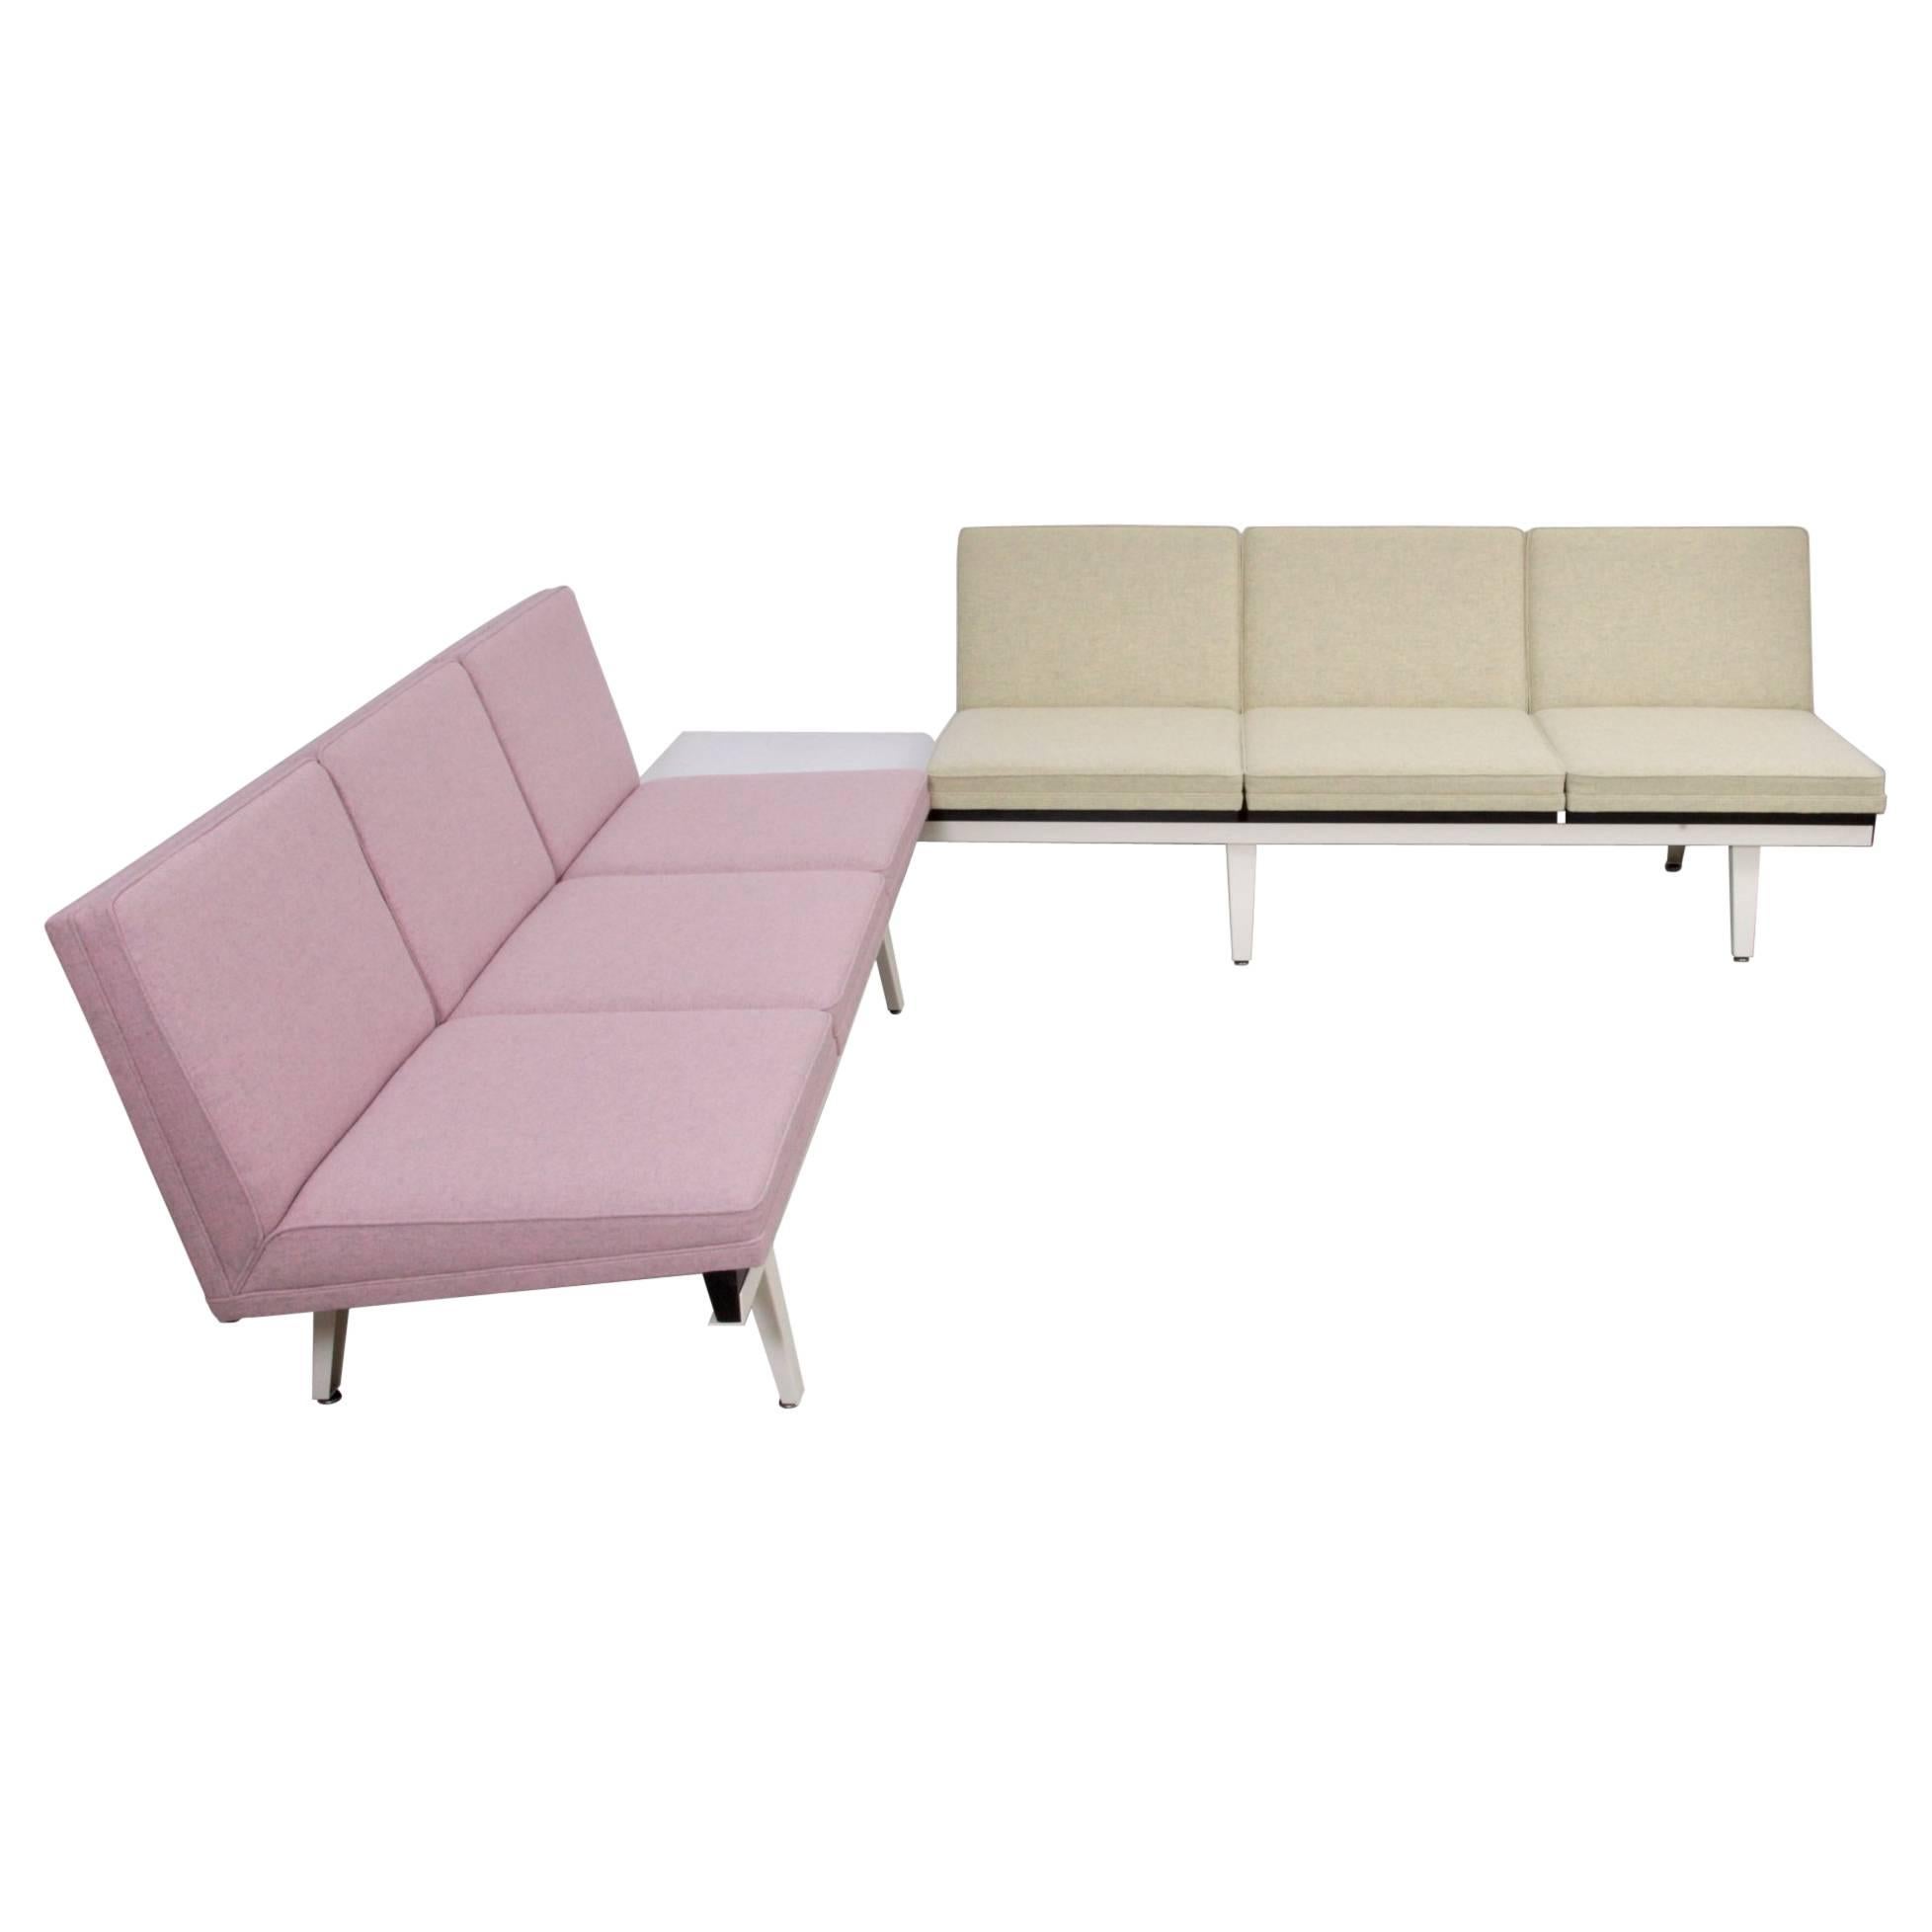 Two-Tone "Steel Frame" Sofa Set by George Nelson